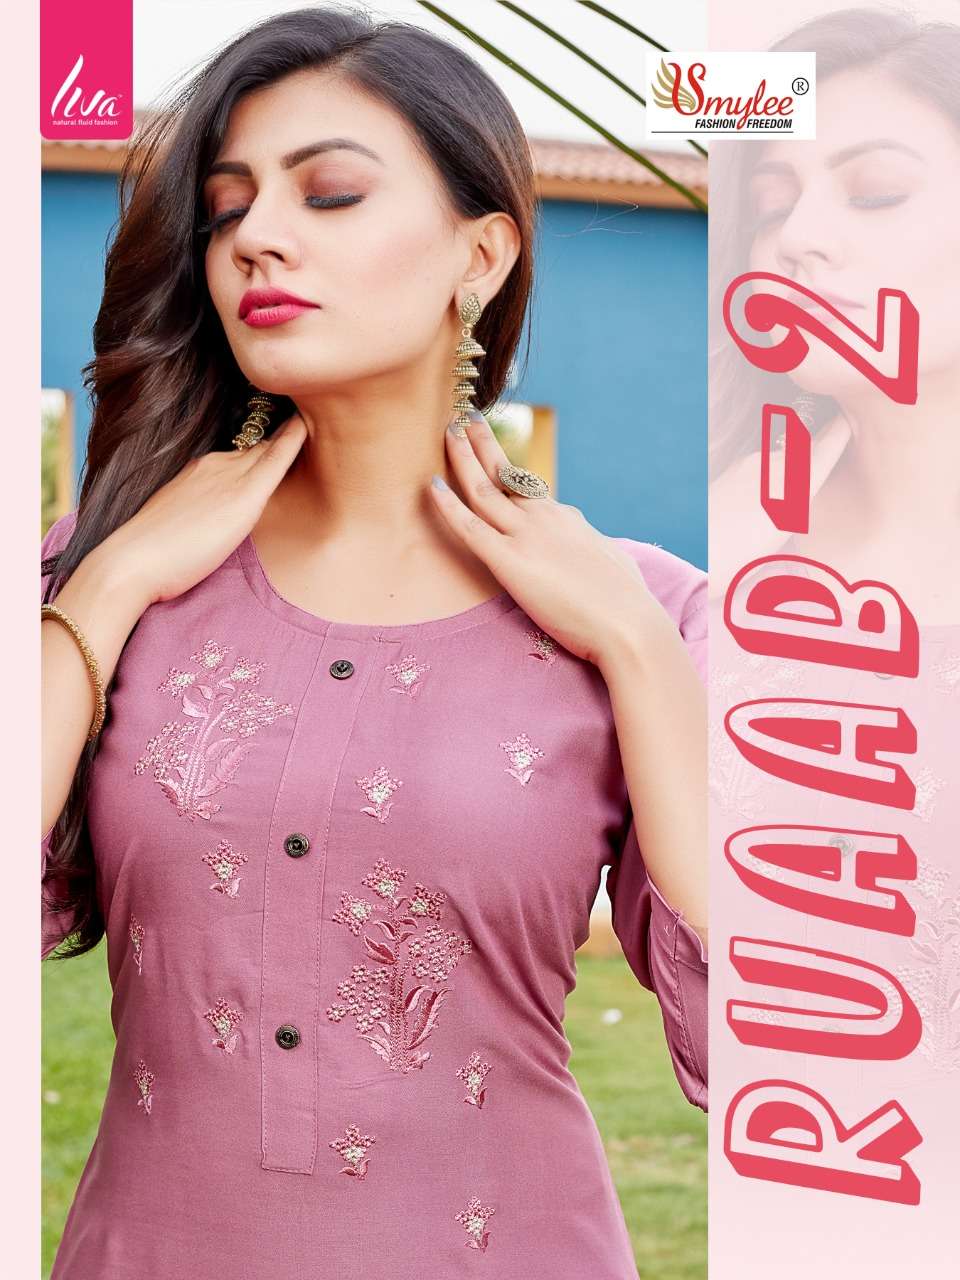 RUAAB VOL 2 BY SMYLEE BRAND HEAVY LIVA APPROVED RAYON WITH MANUAL EMBROIDERY STRAIGHT KURTI WHOLESAL...